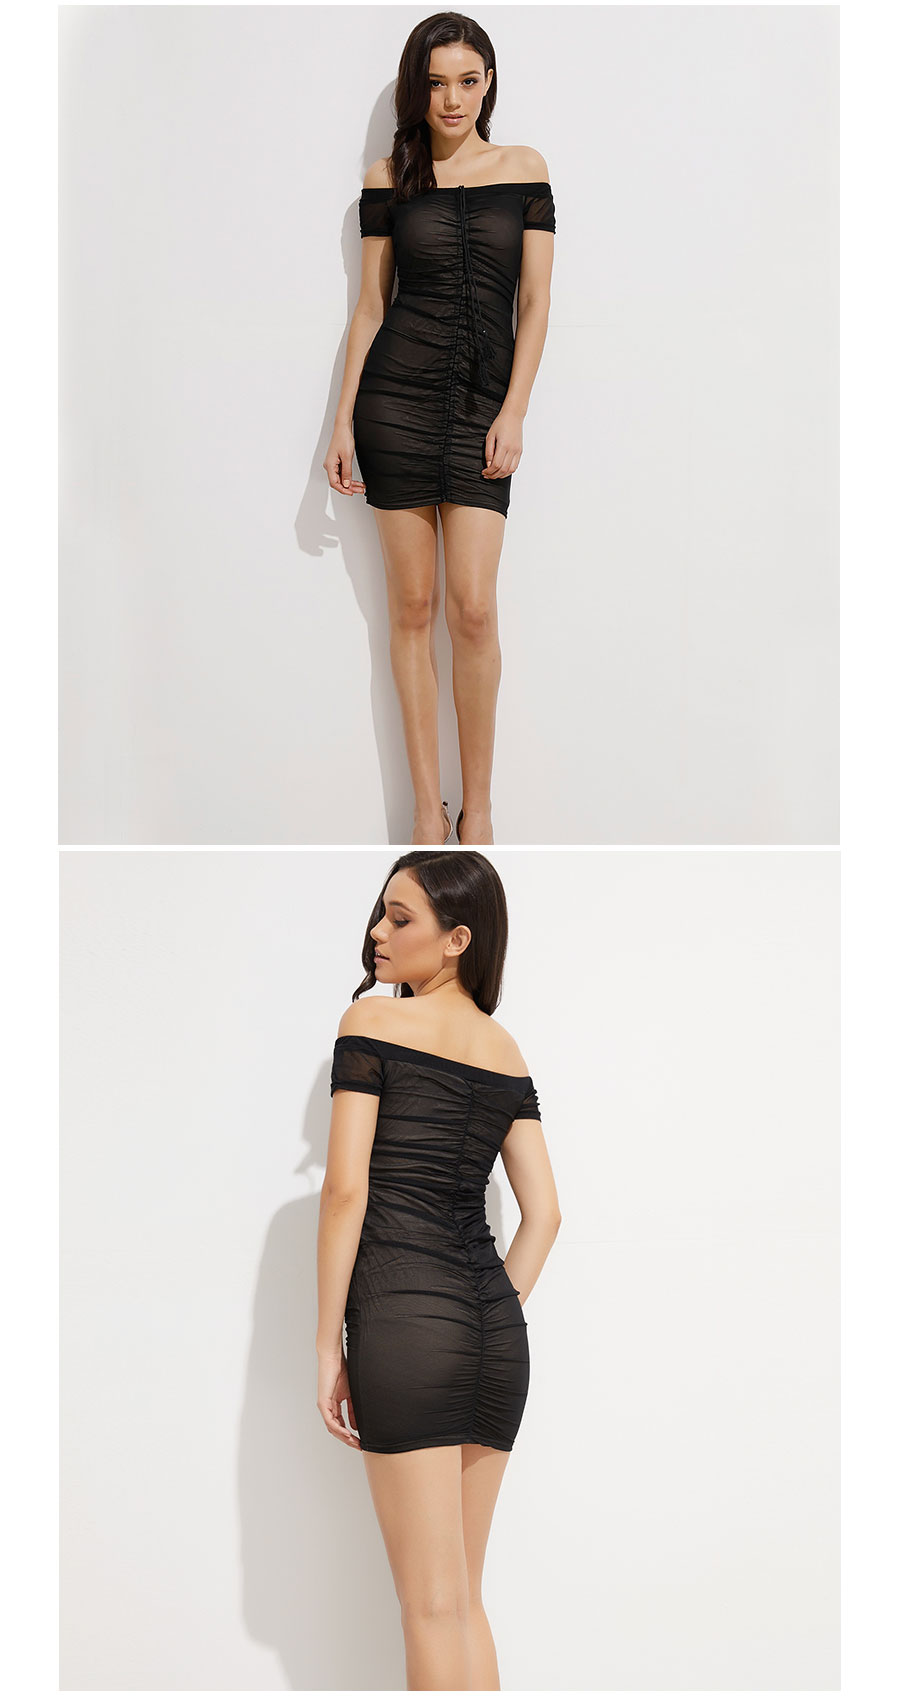 Colysmo-Off-Shoulder-Lift-Up-Drawstring-Ruched-Sheer-Mesh-Dress-Mini-Strapless-Club-Party-Bodycon-Wo-32800298344